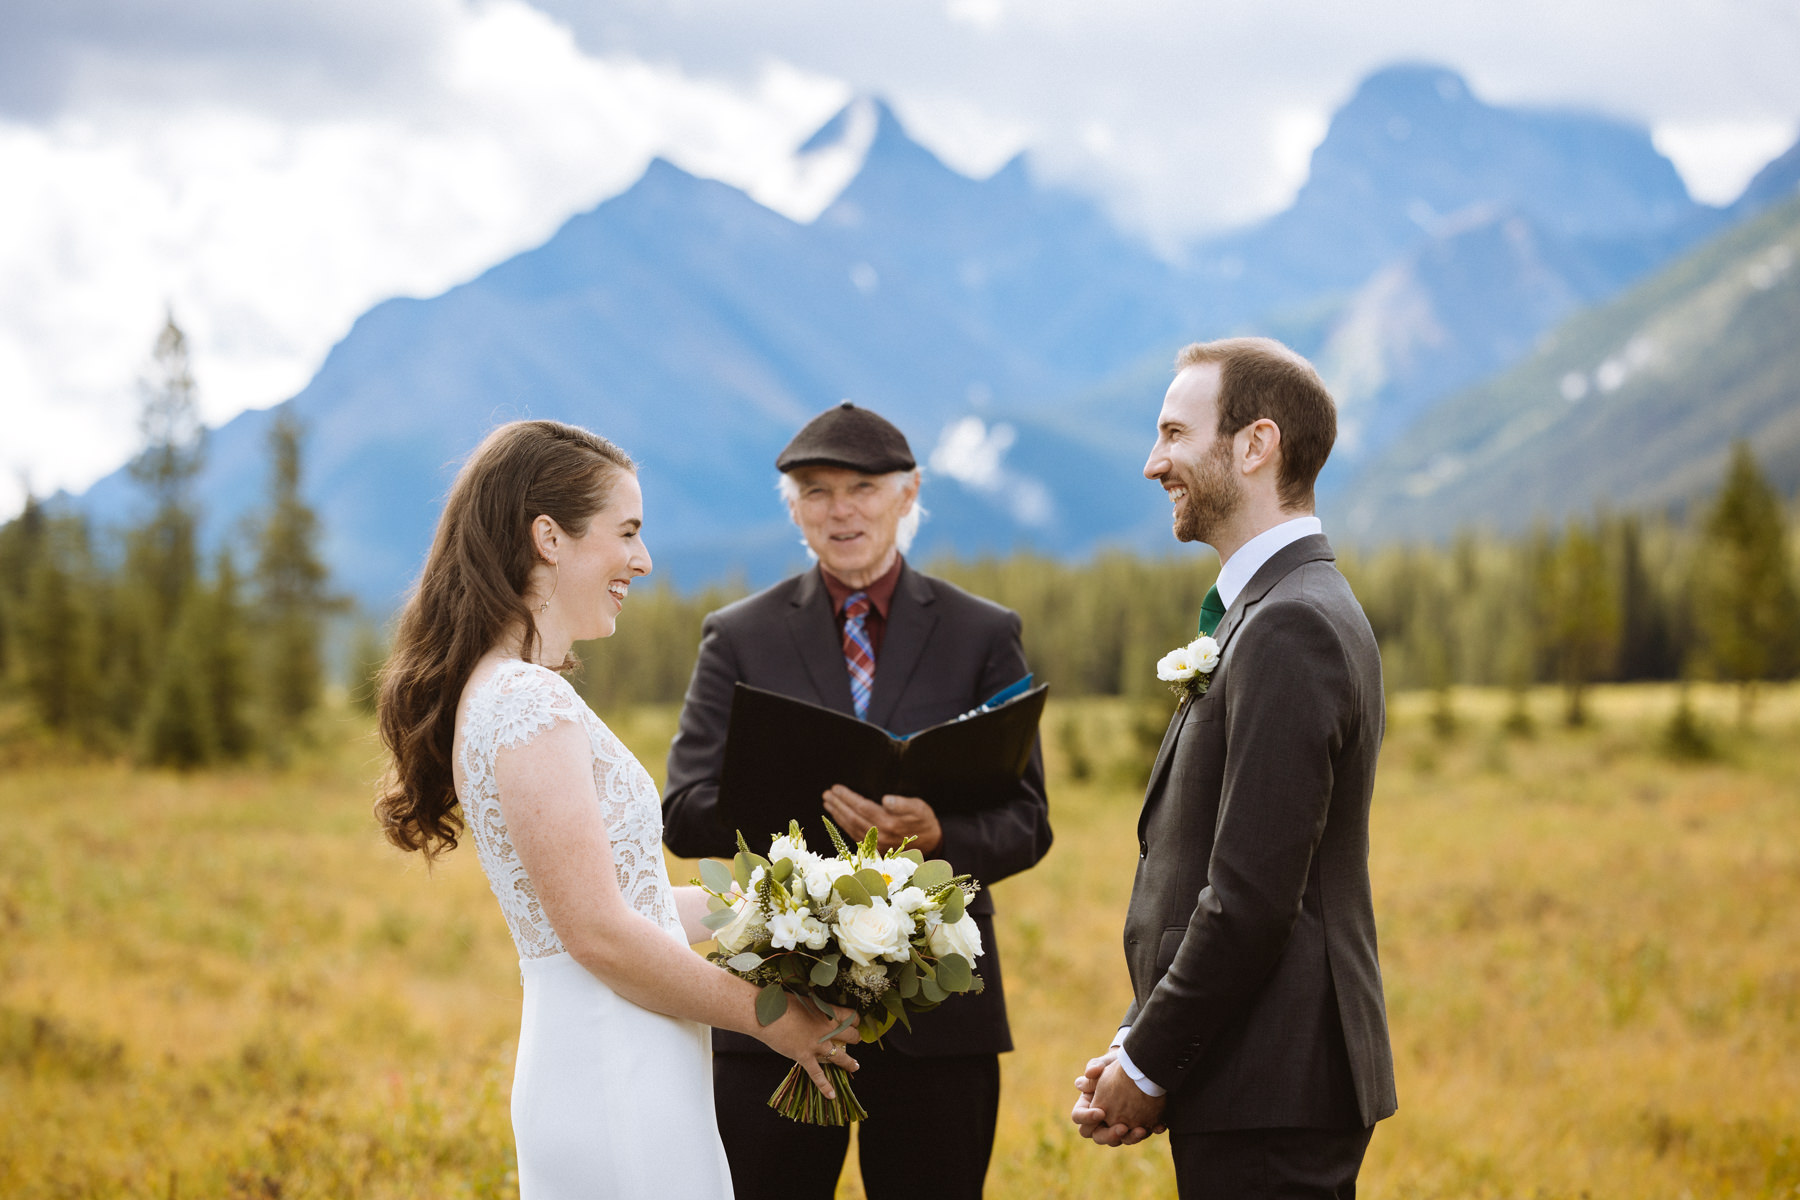 Canmore hiking elopement photographers - Image 11